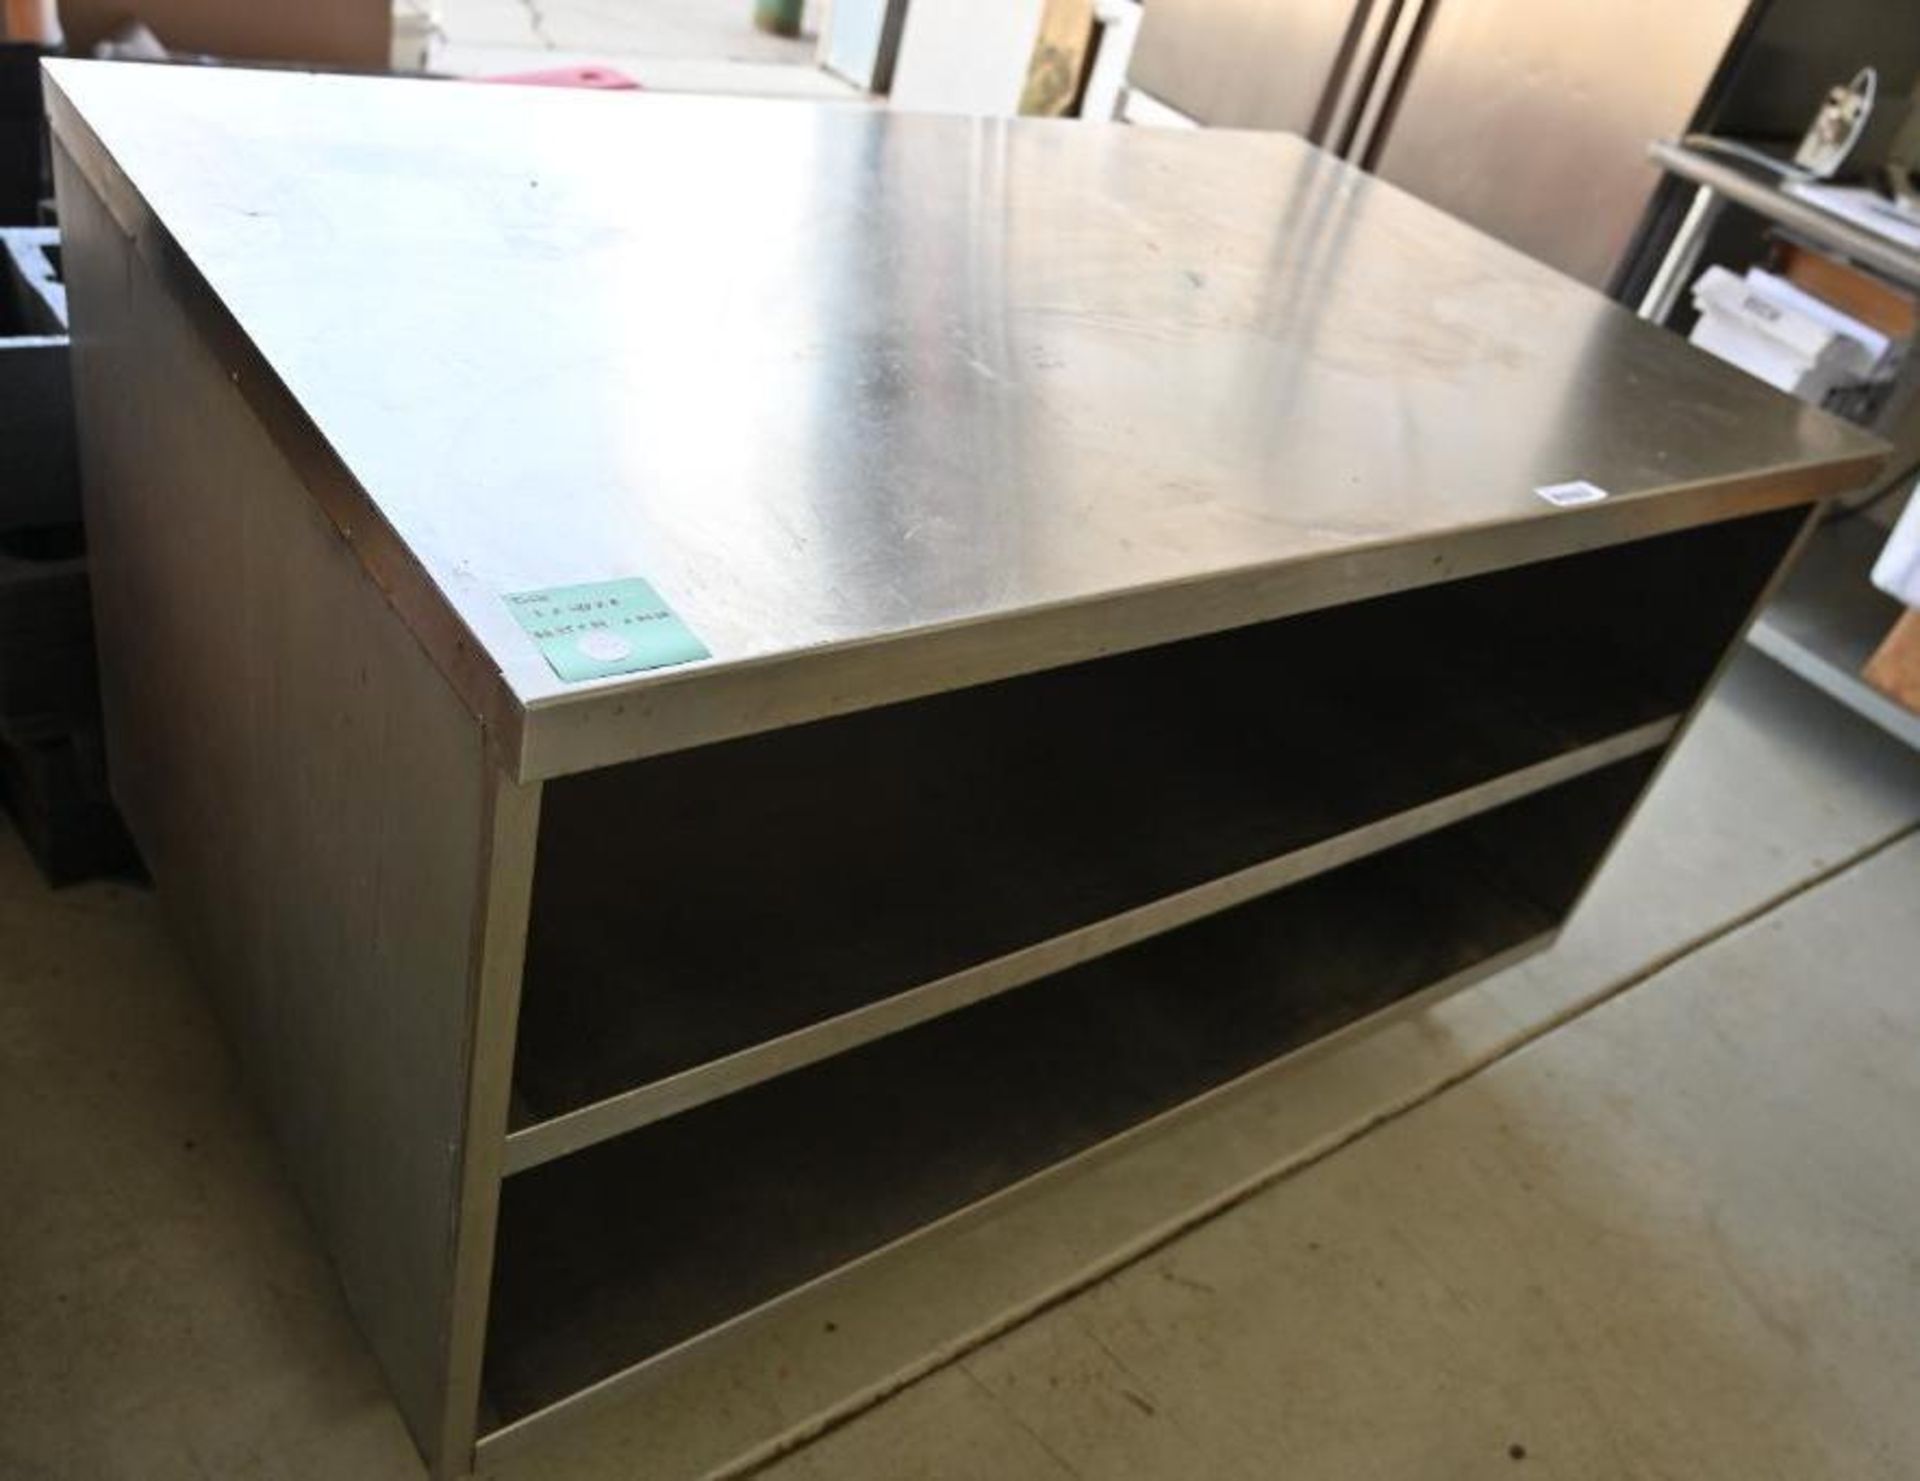 56.25" x 34" x 34.25" Stainless Steel Table with Two Shelves - Image 4 of 10